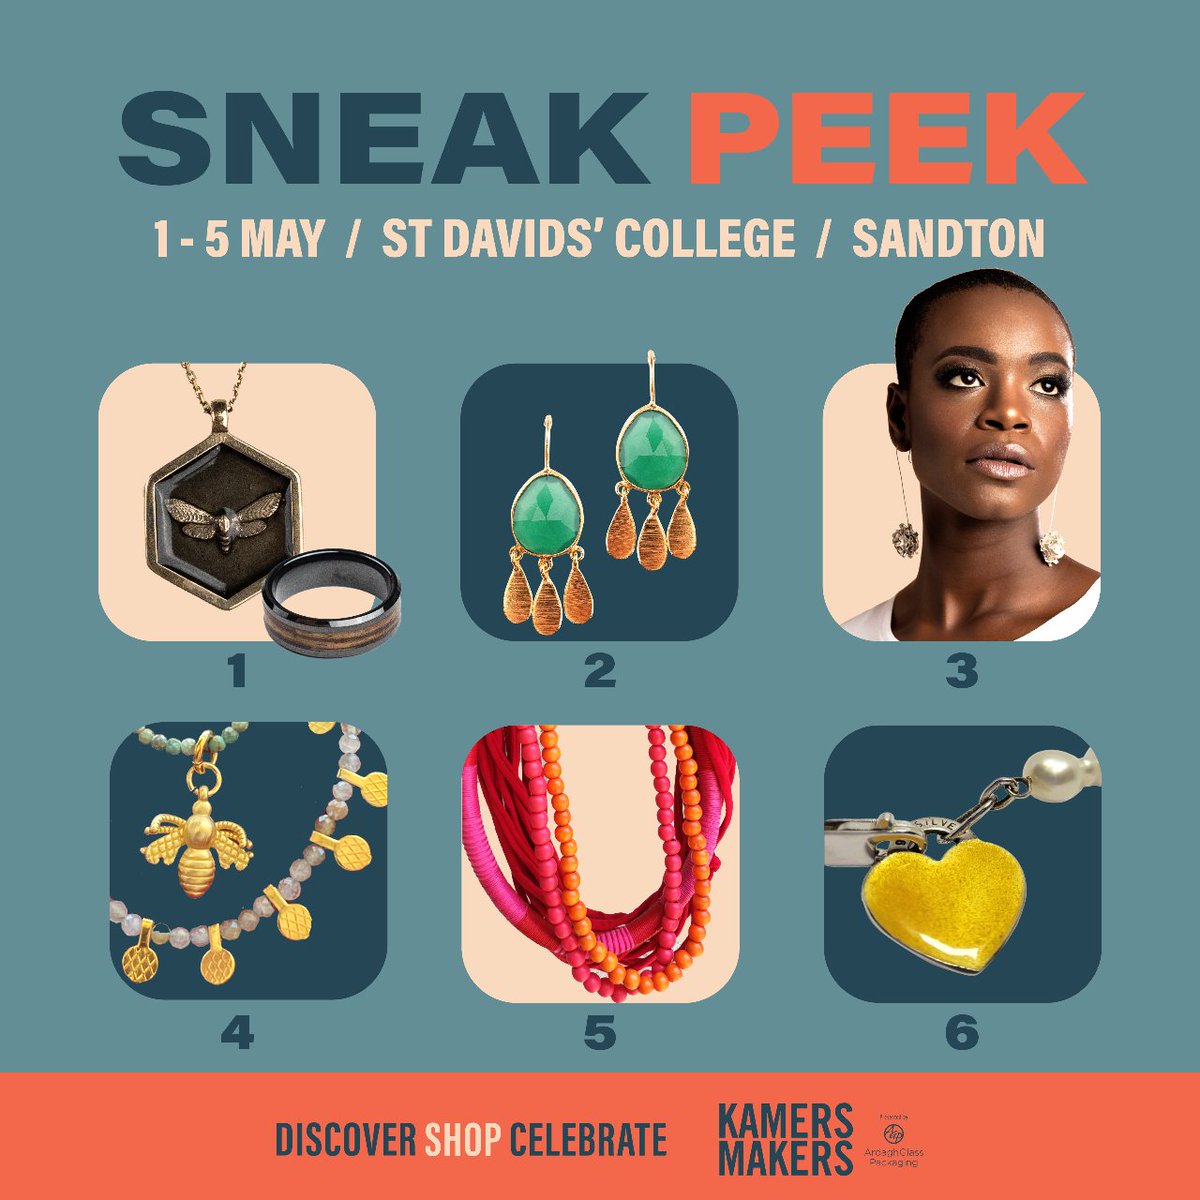 No-one accessorizes like KM does! From scarves to scrunchies to bracelets... we will have literally thousands of proudly local Maker products on show at KM St Davids' Marist Inanda, Sandton. 📍St David's Marist Inanda, Sandton 📌 1 - 5 May, 9am - 5pm 🔗 bit.ly/4aqilOc